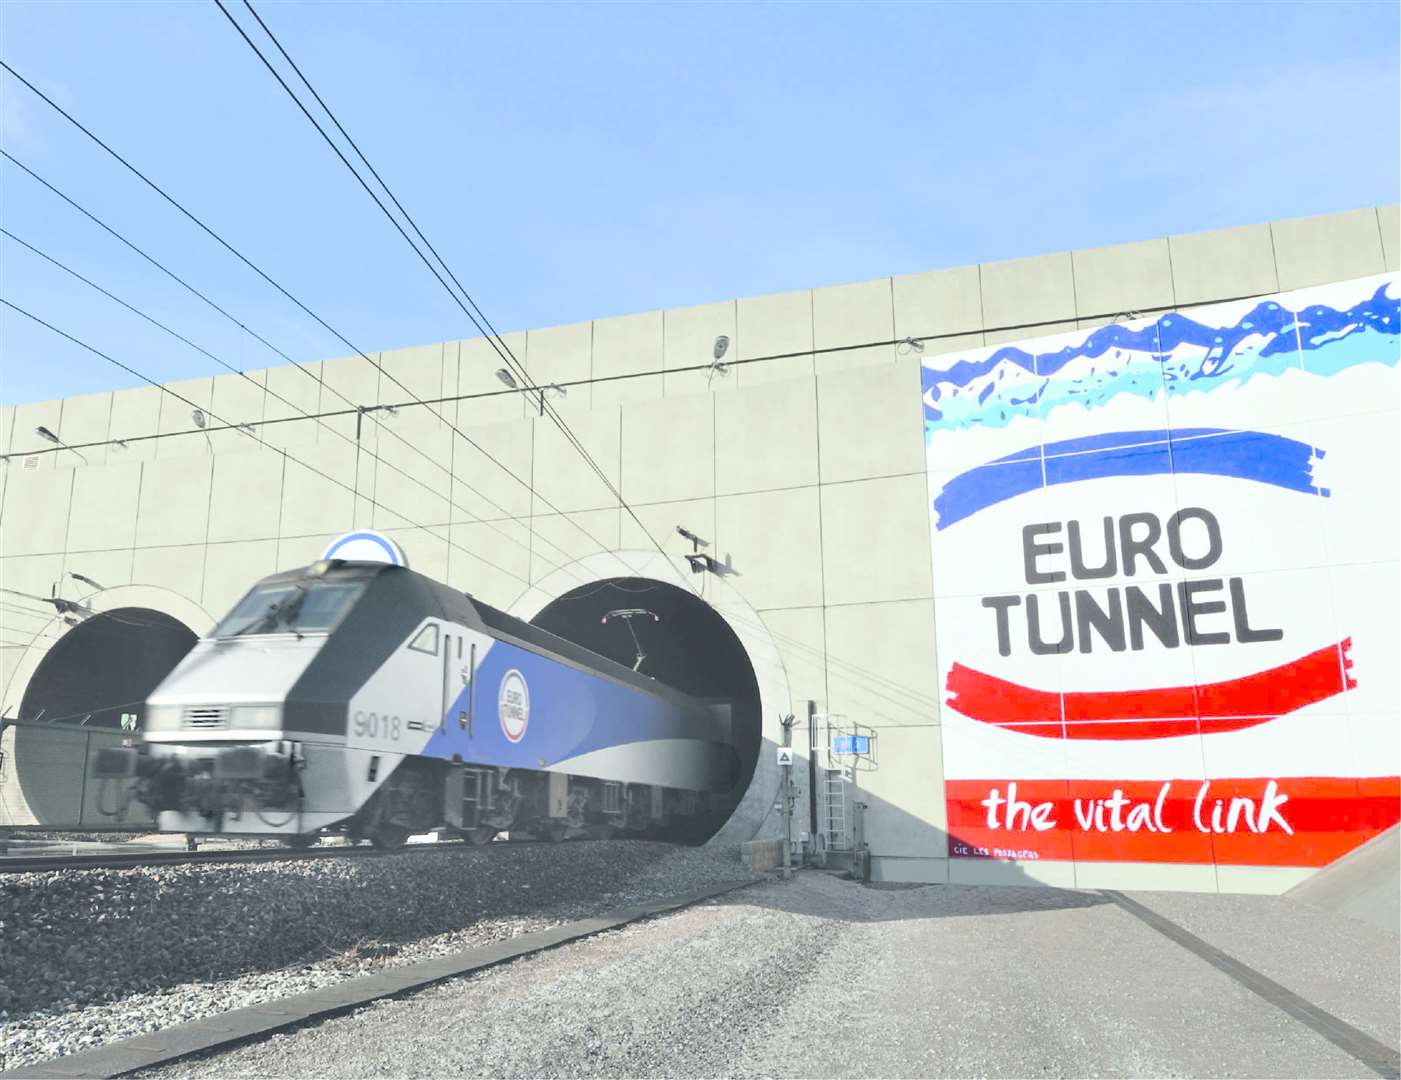 Eurotunnel saw a huge surge in traffic over the Easter holiday period